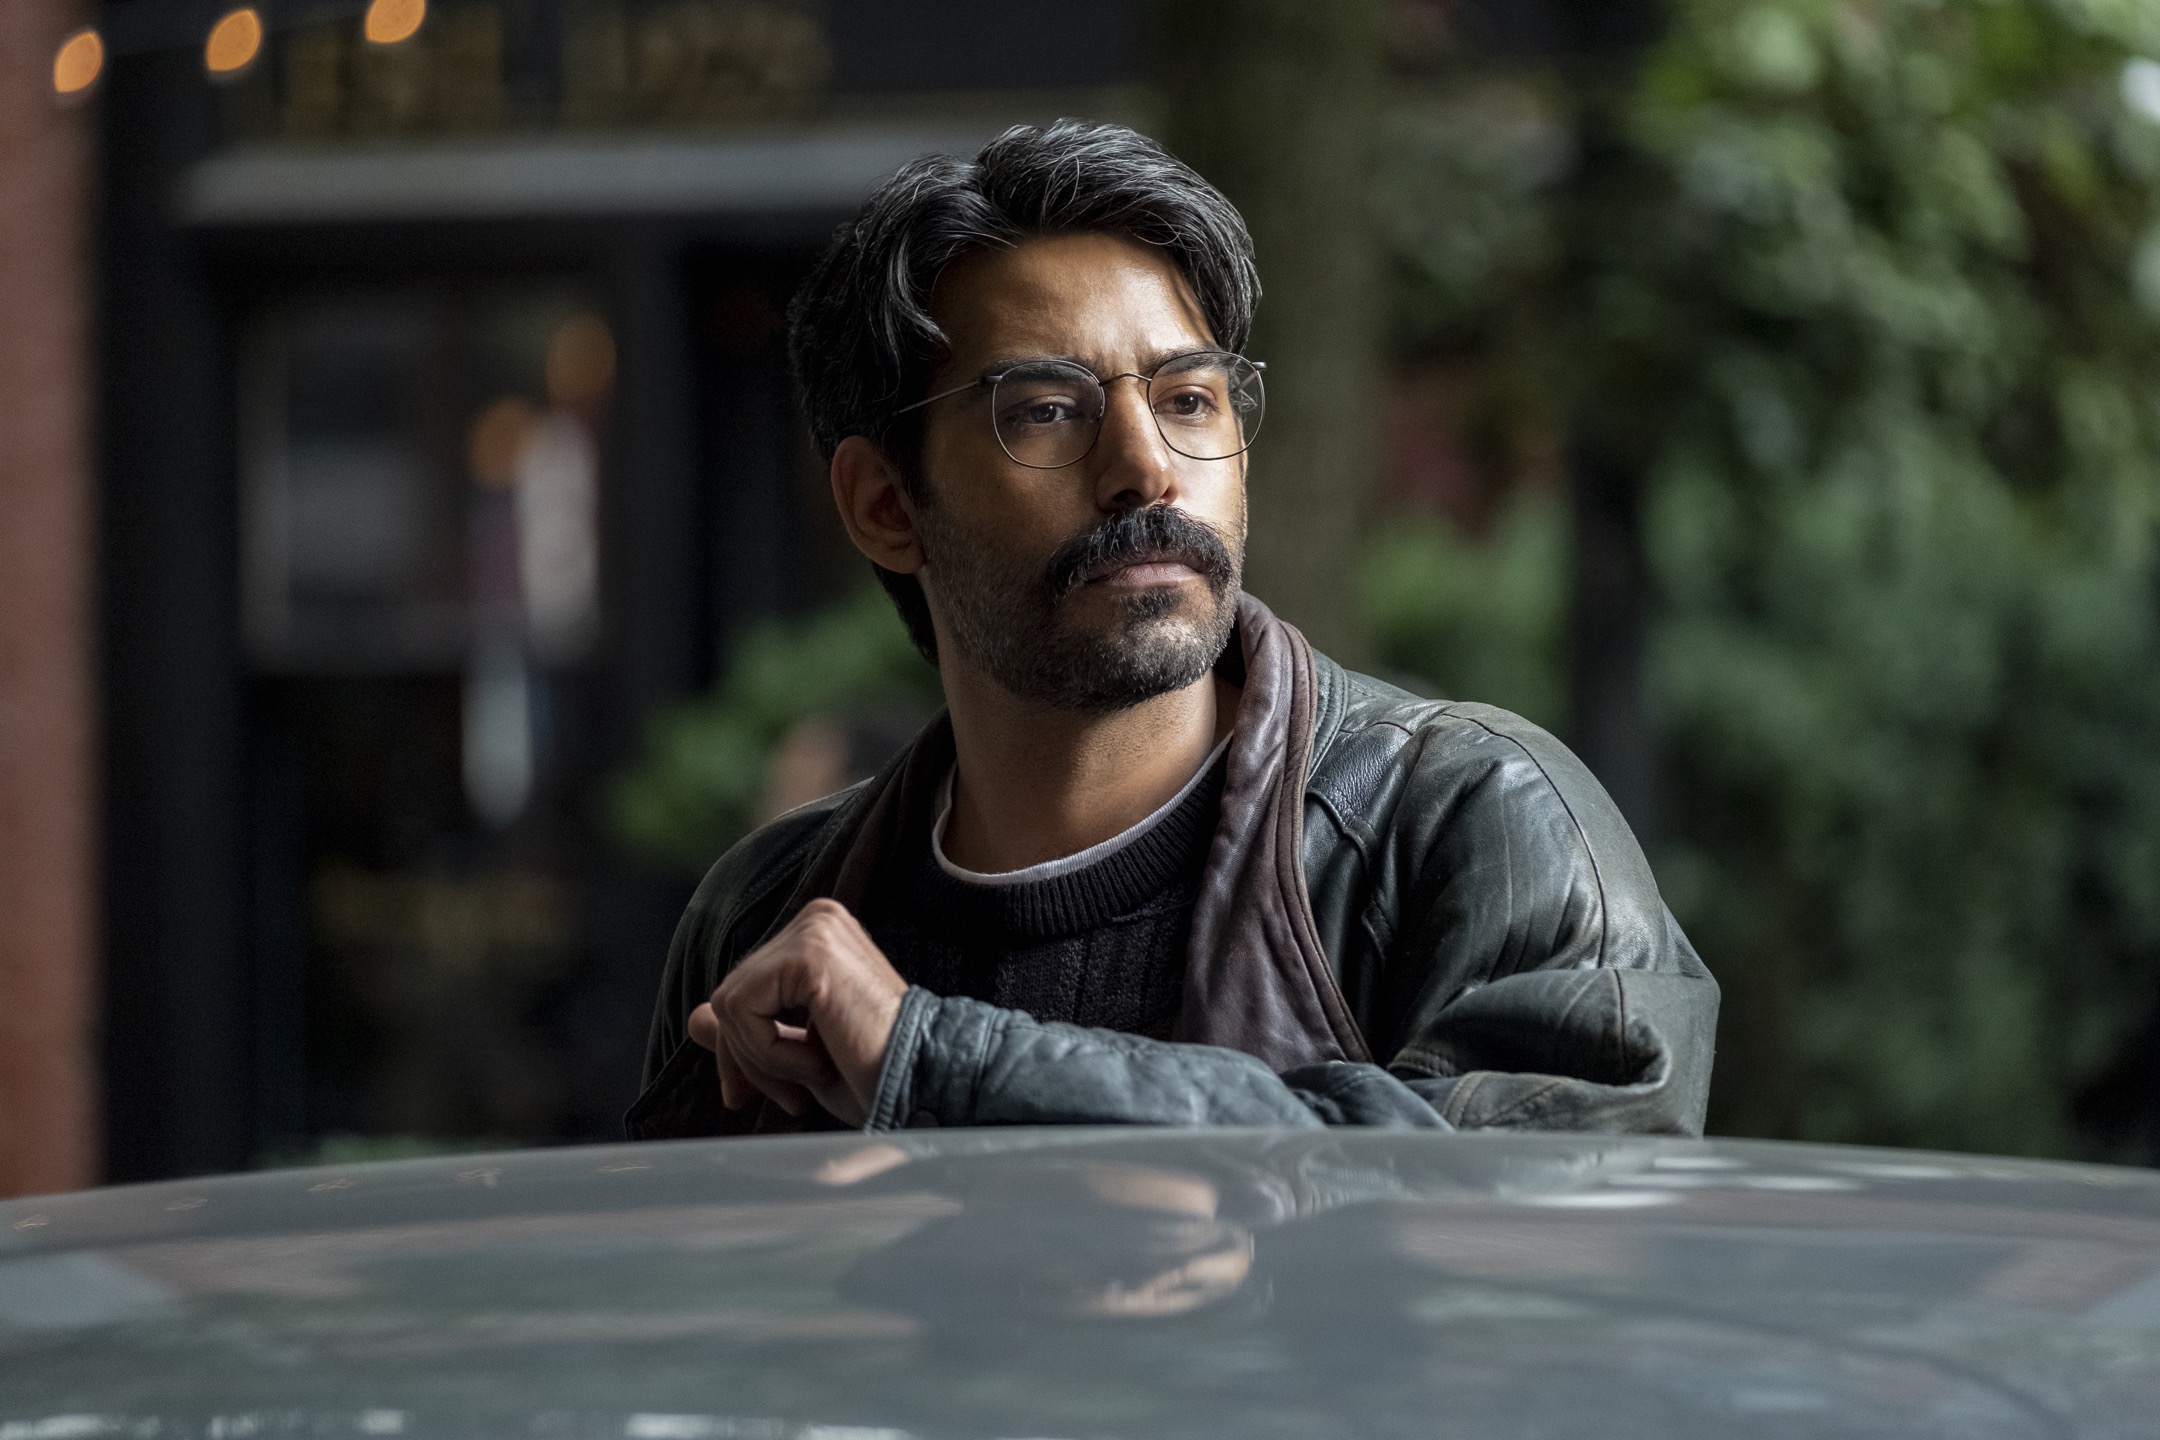 THE HAUNTING OF BLY MANOR (L to R) RAHUL KOHLI as OWEN in episode 101 of THE HAUNTING OF BLY MANOR Cr. EIKE SCHROTER/NETFLIX © 2020